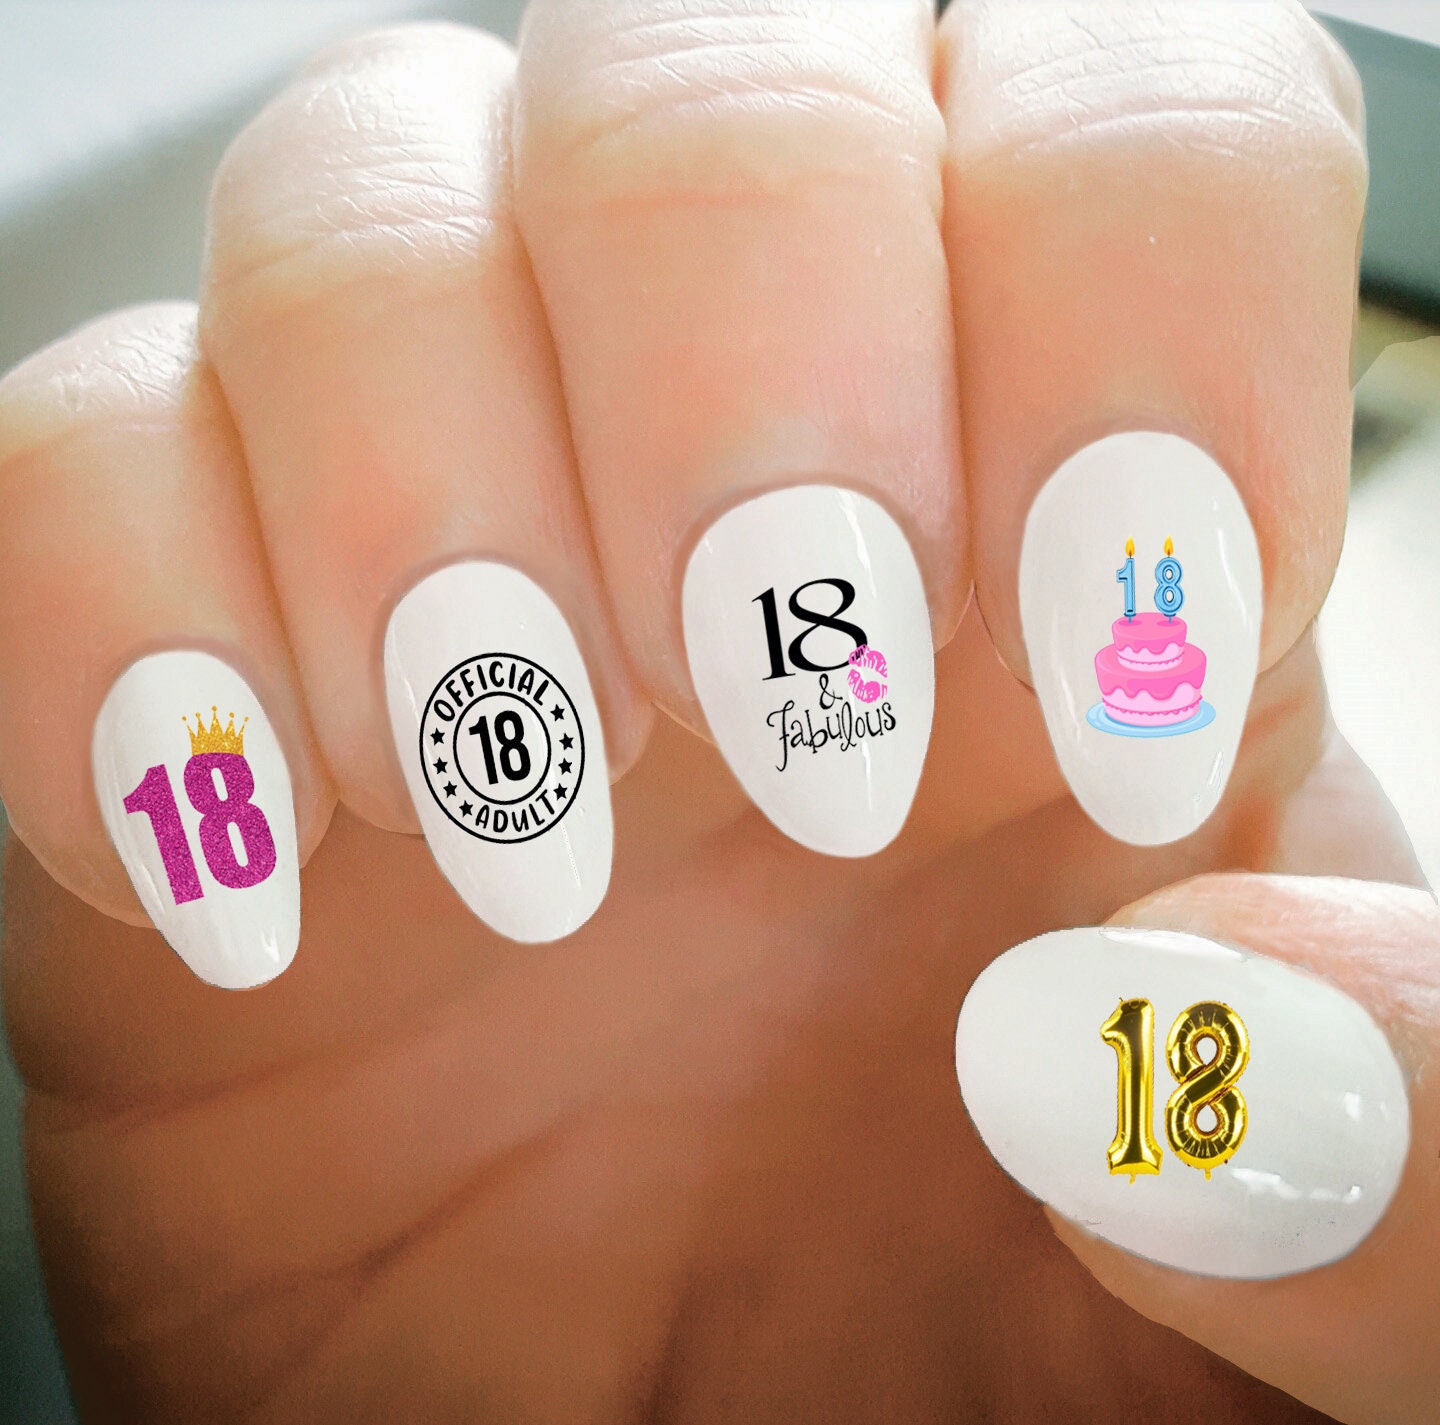 21 Birthday Nail Design Ideas for Your Special Day - Beautiful Dawn Designs  | Birthday nail designs, Birthday nail art, Birthday nails